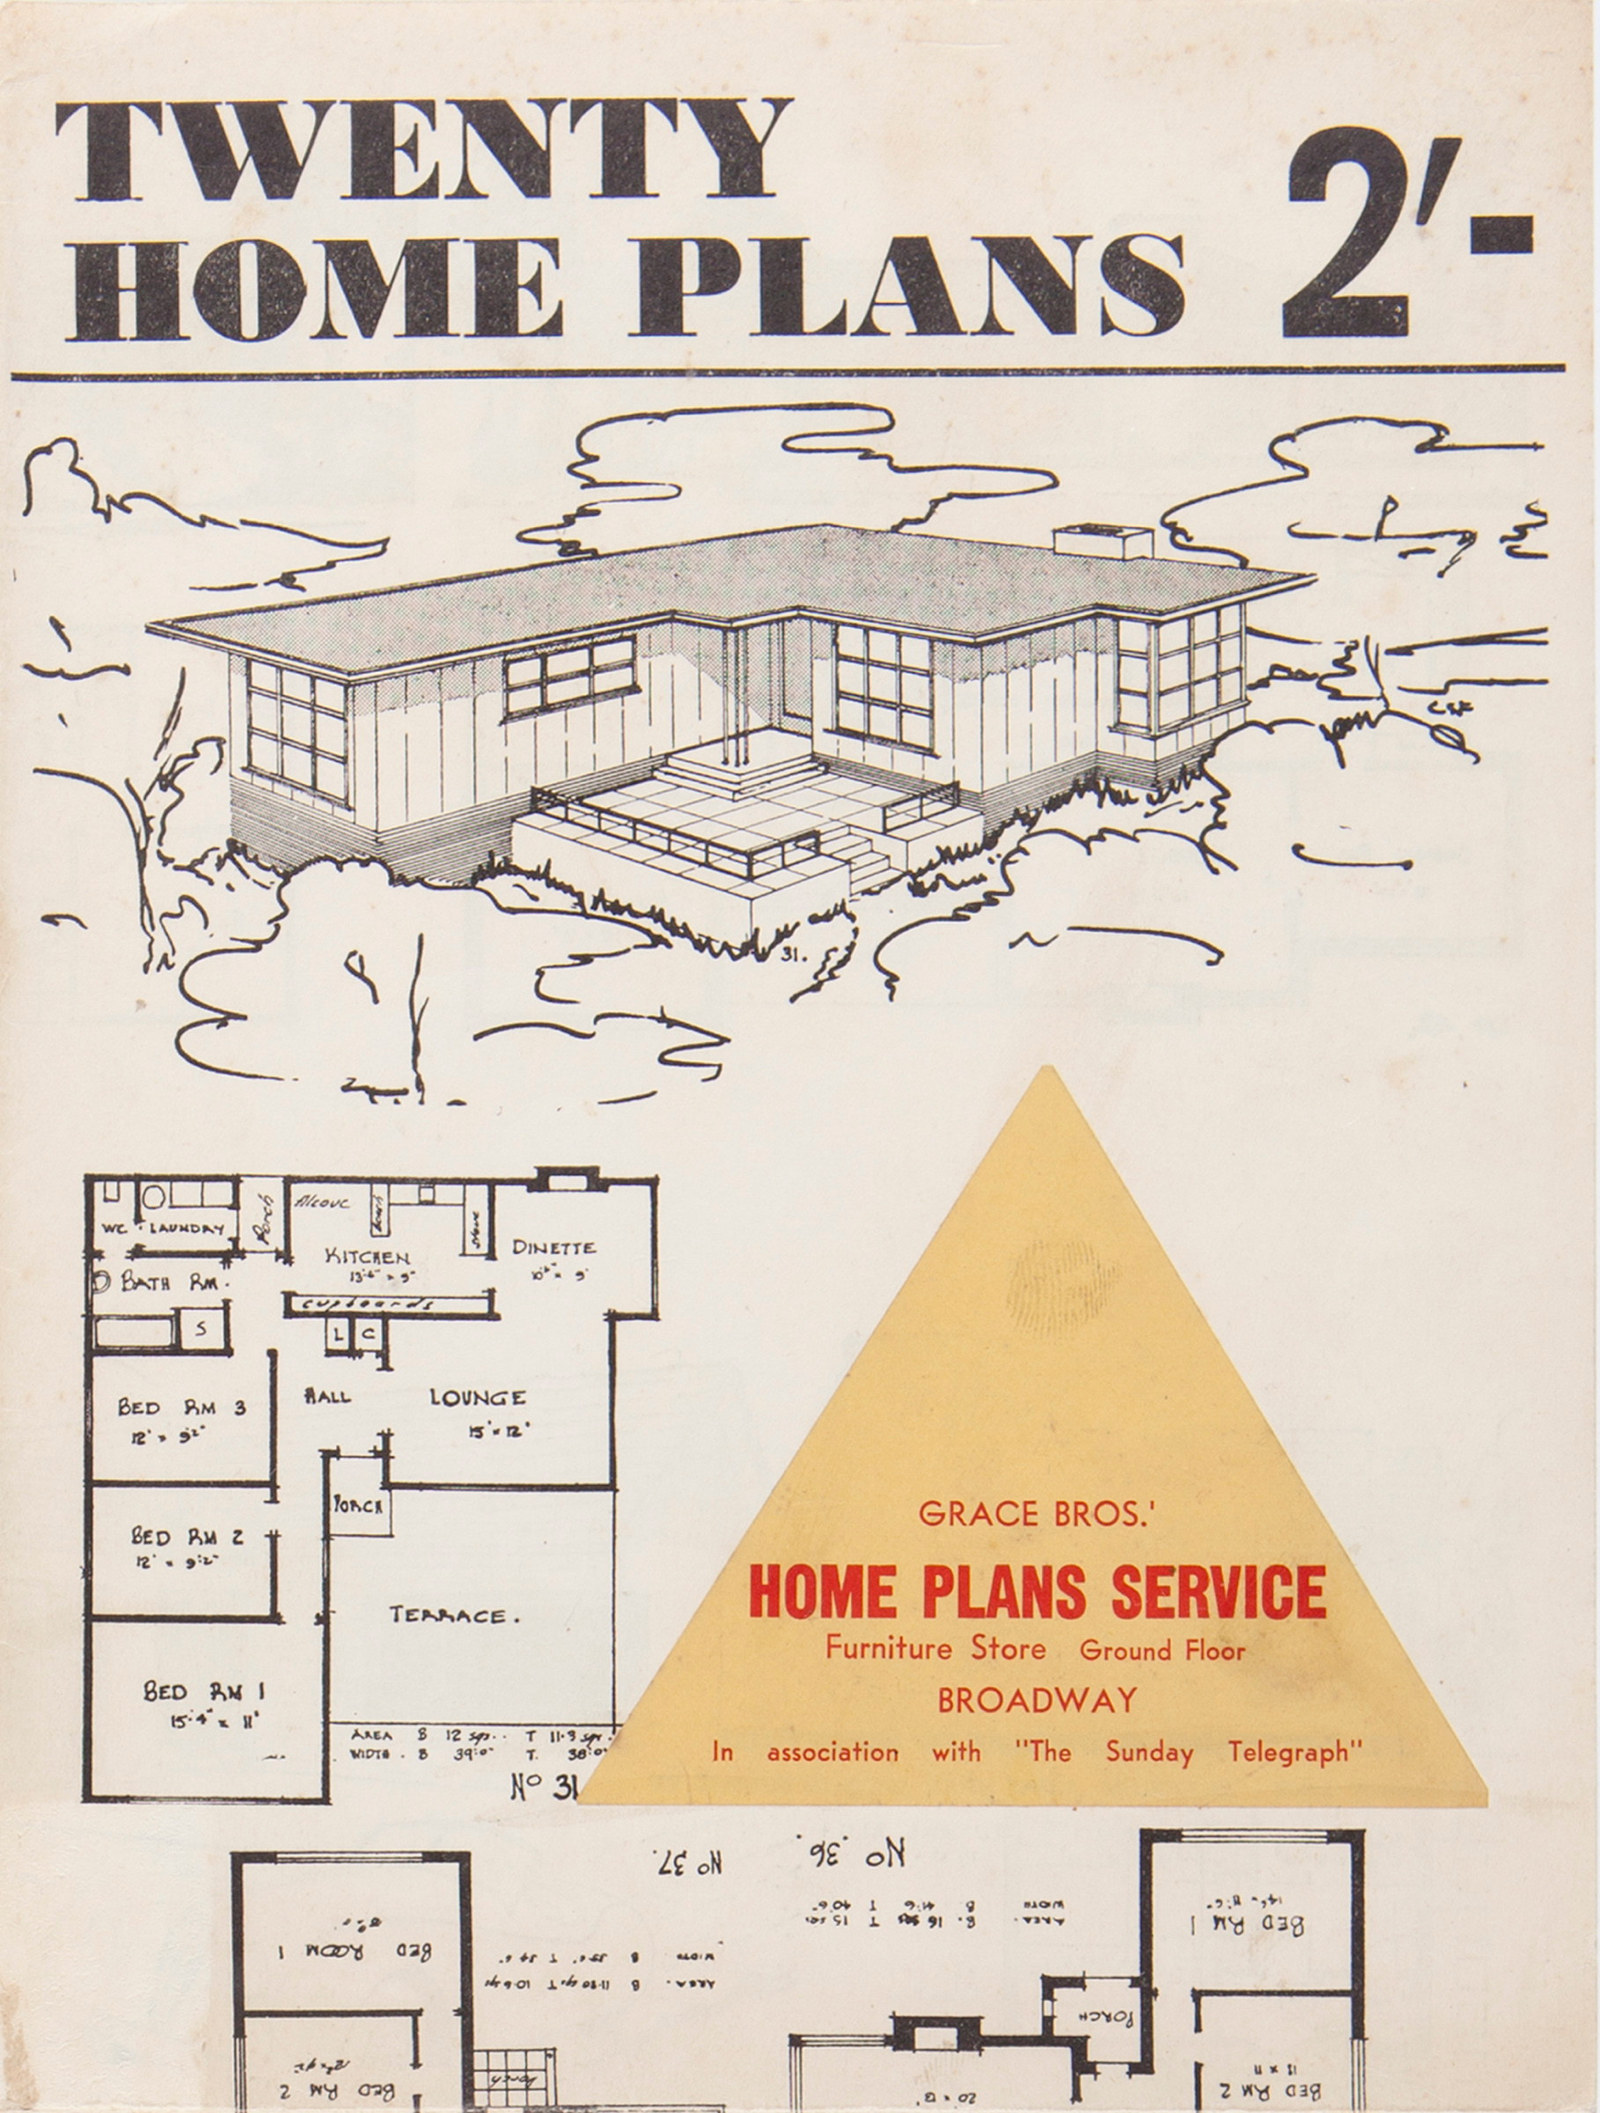 Detail of booklet front page with title "Twenty Home Plans".